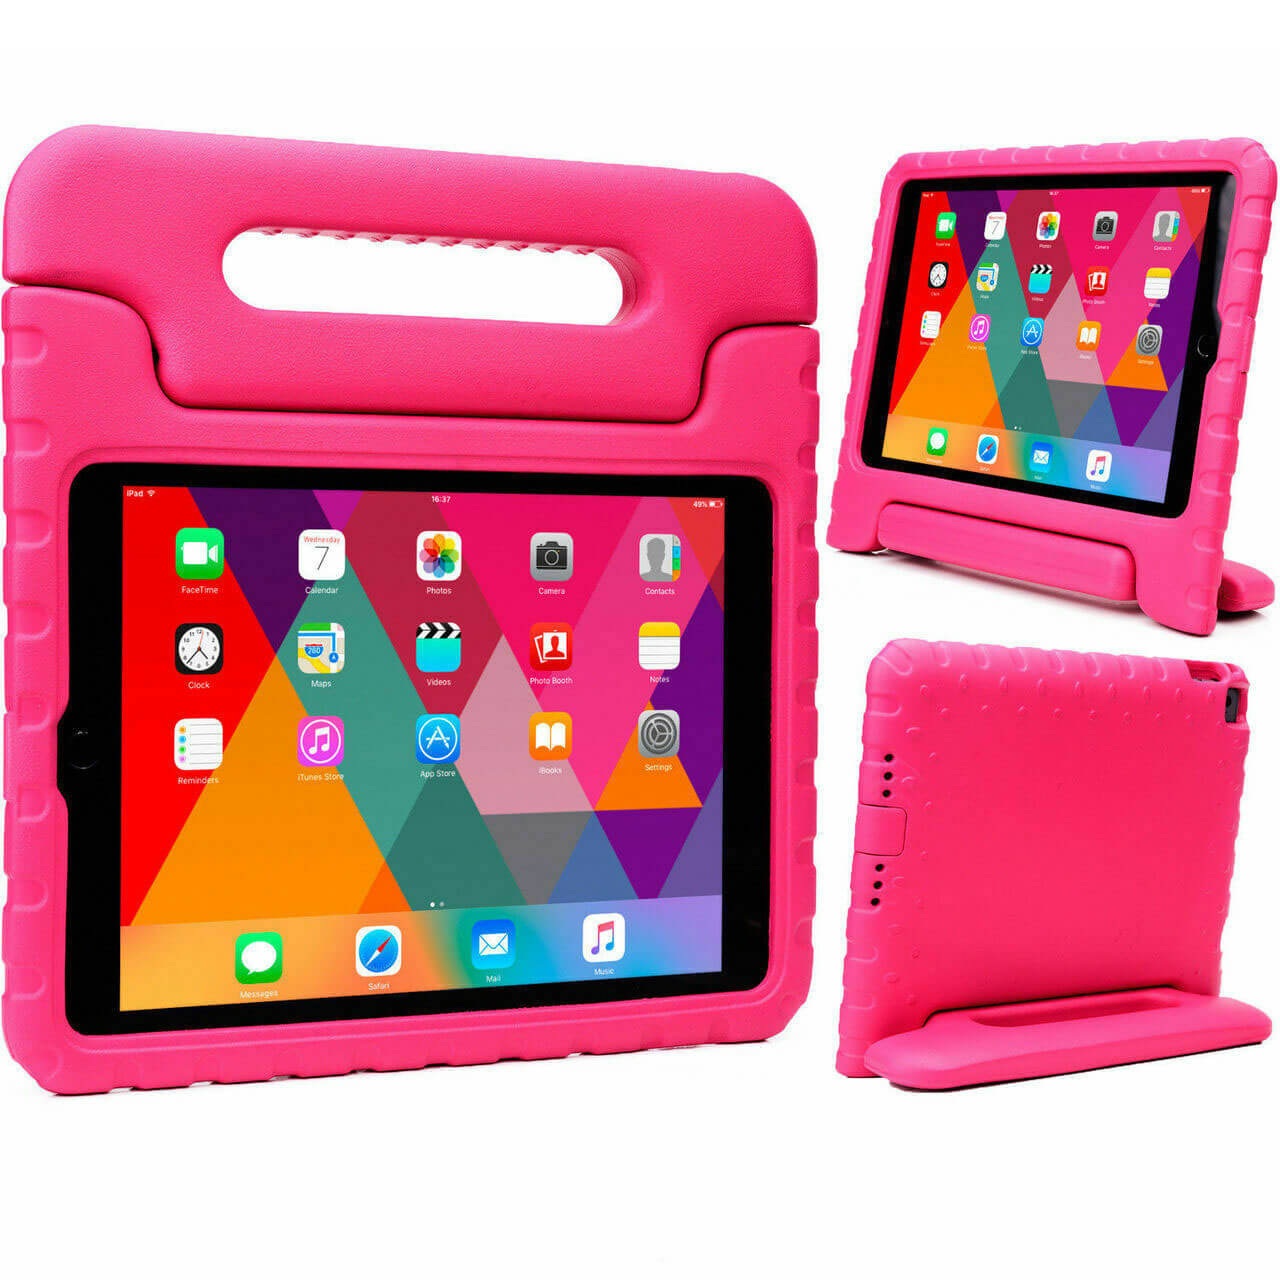 For Apple iPad Air / Air 2 Kids Case Shockproof Cover With Stand Pink